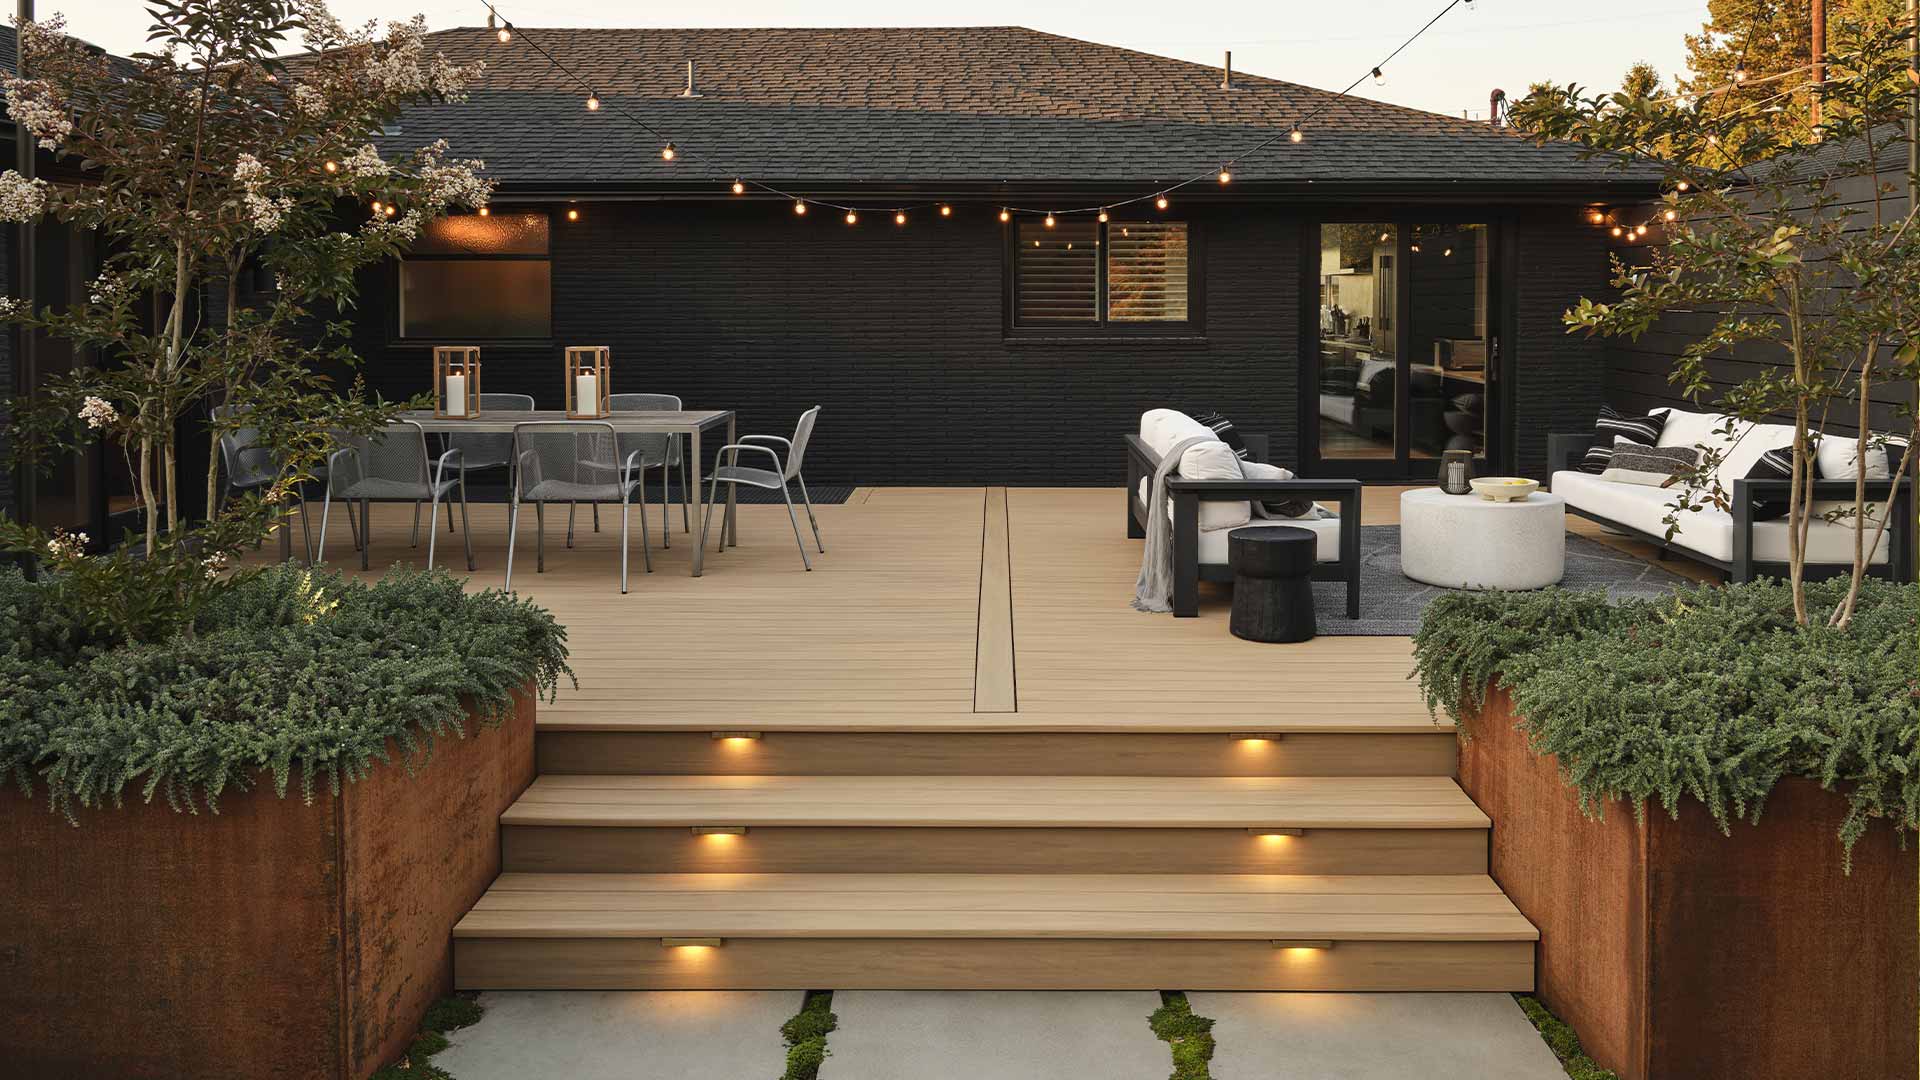 Black brick home with tan deck that has string lights overhead